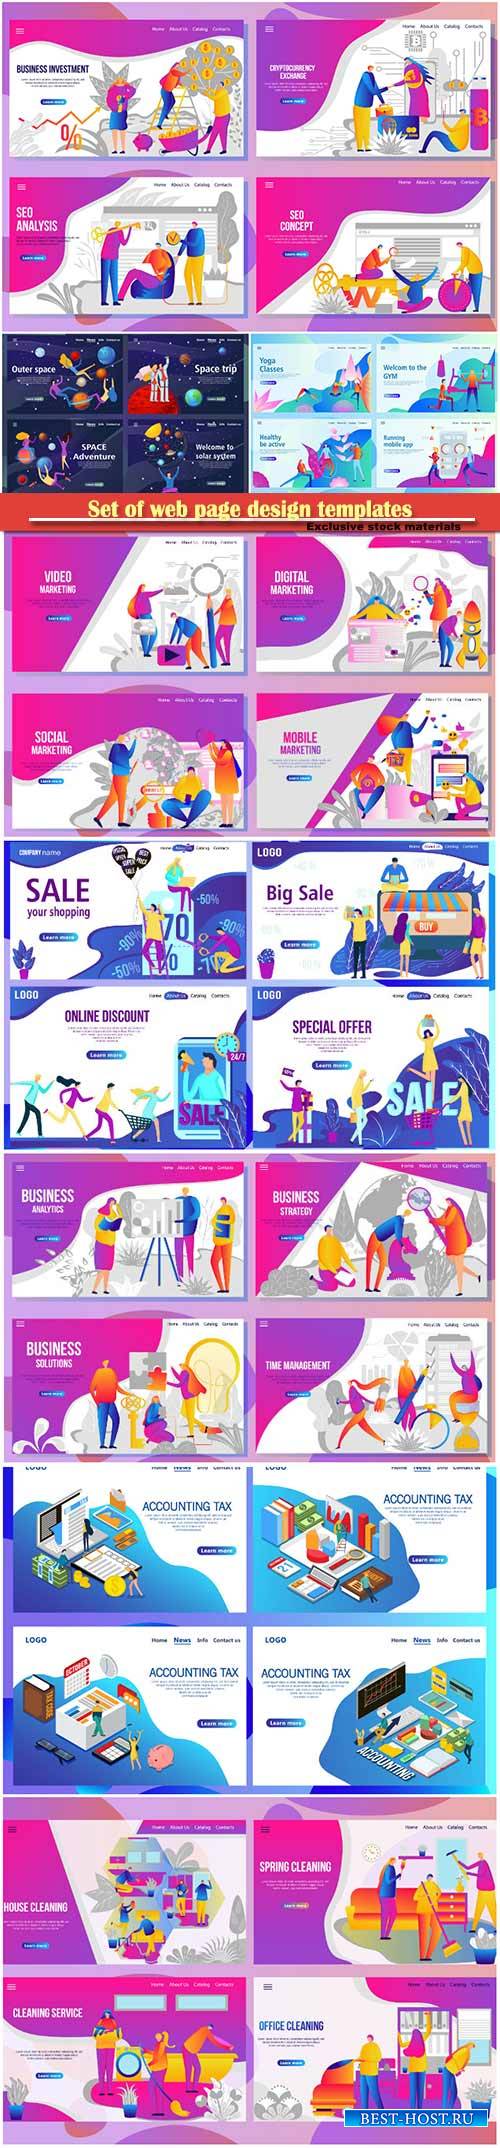 Set of web page design templates for business, vector illustration concepts ...